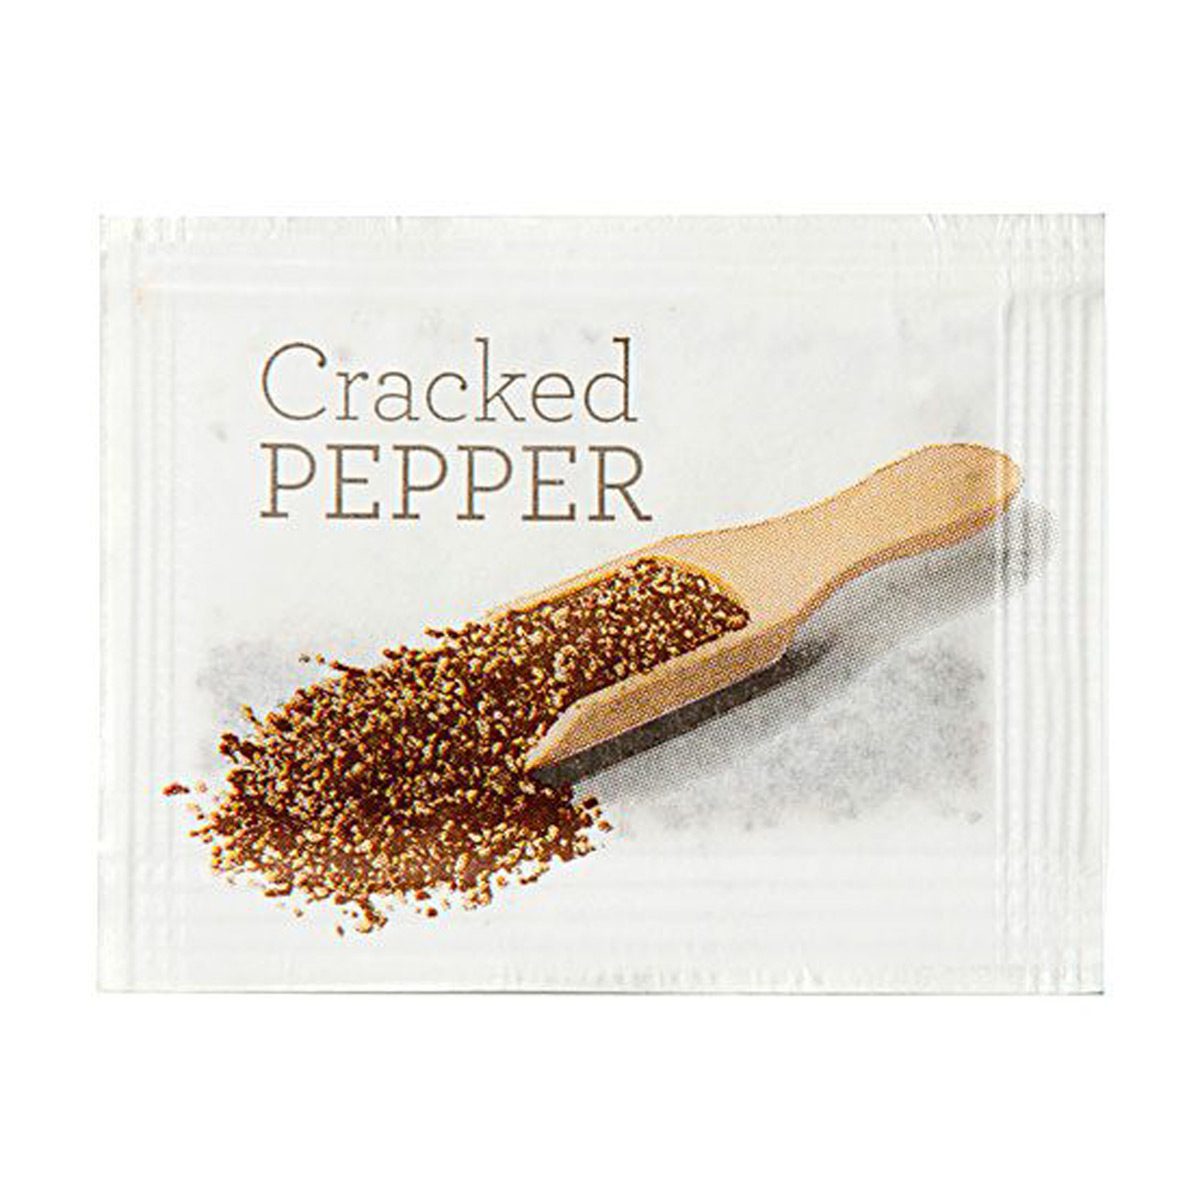 consumables-hospitality-beverage-food-cracked-pepper-sachet-x2000-scahets-freshly-cracked-premium-pepper-packed-into-single-serve-sachets-vjs-distributors-HPPEP